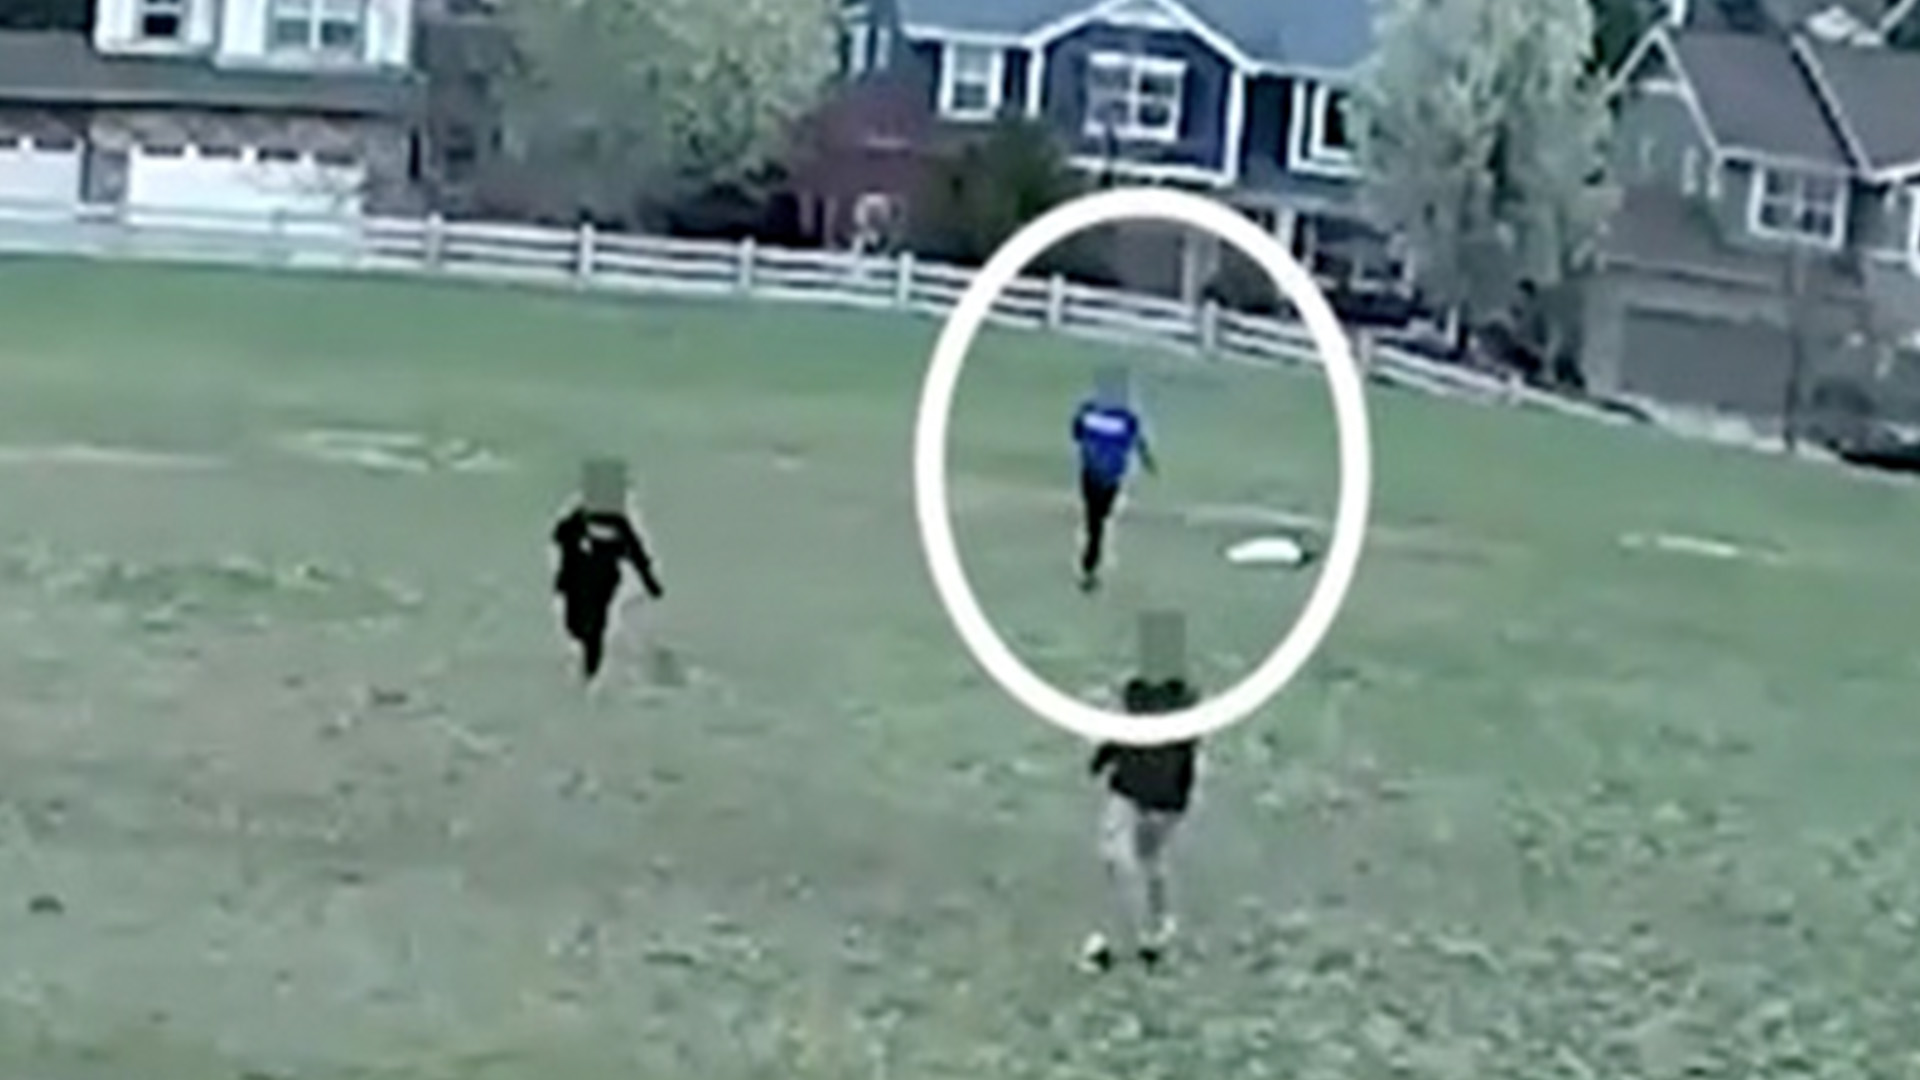 Terrifying moment boy is almost snatched by kidnapper in broad daylight as he played with friends at elementary school [Video]